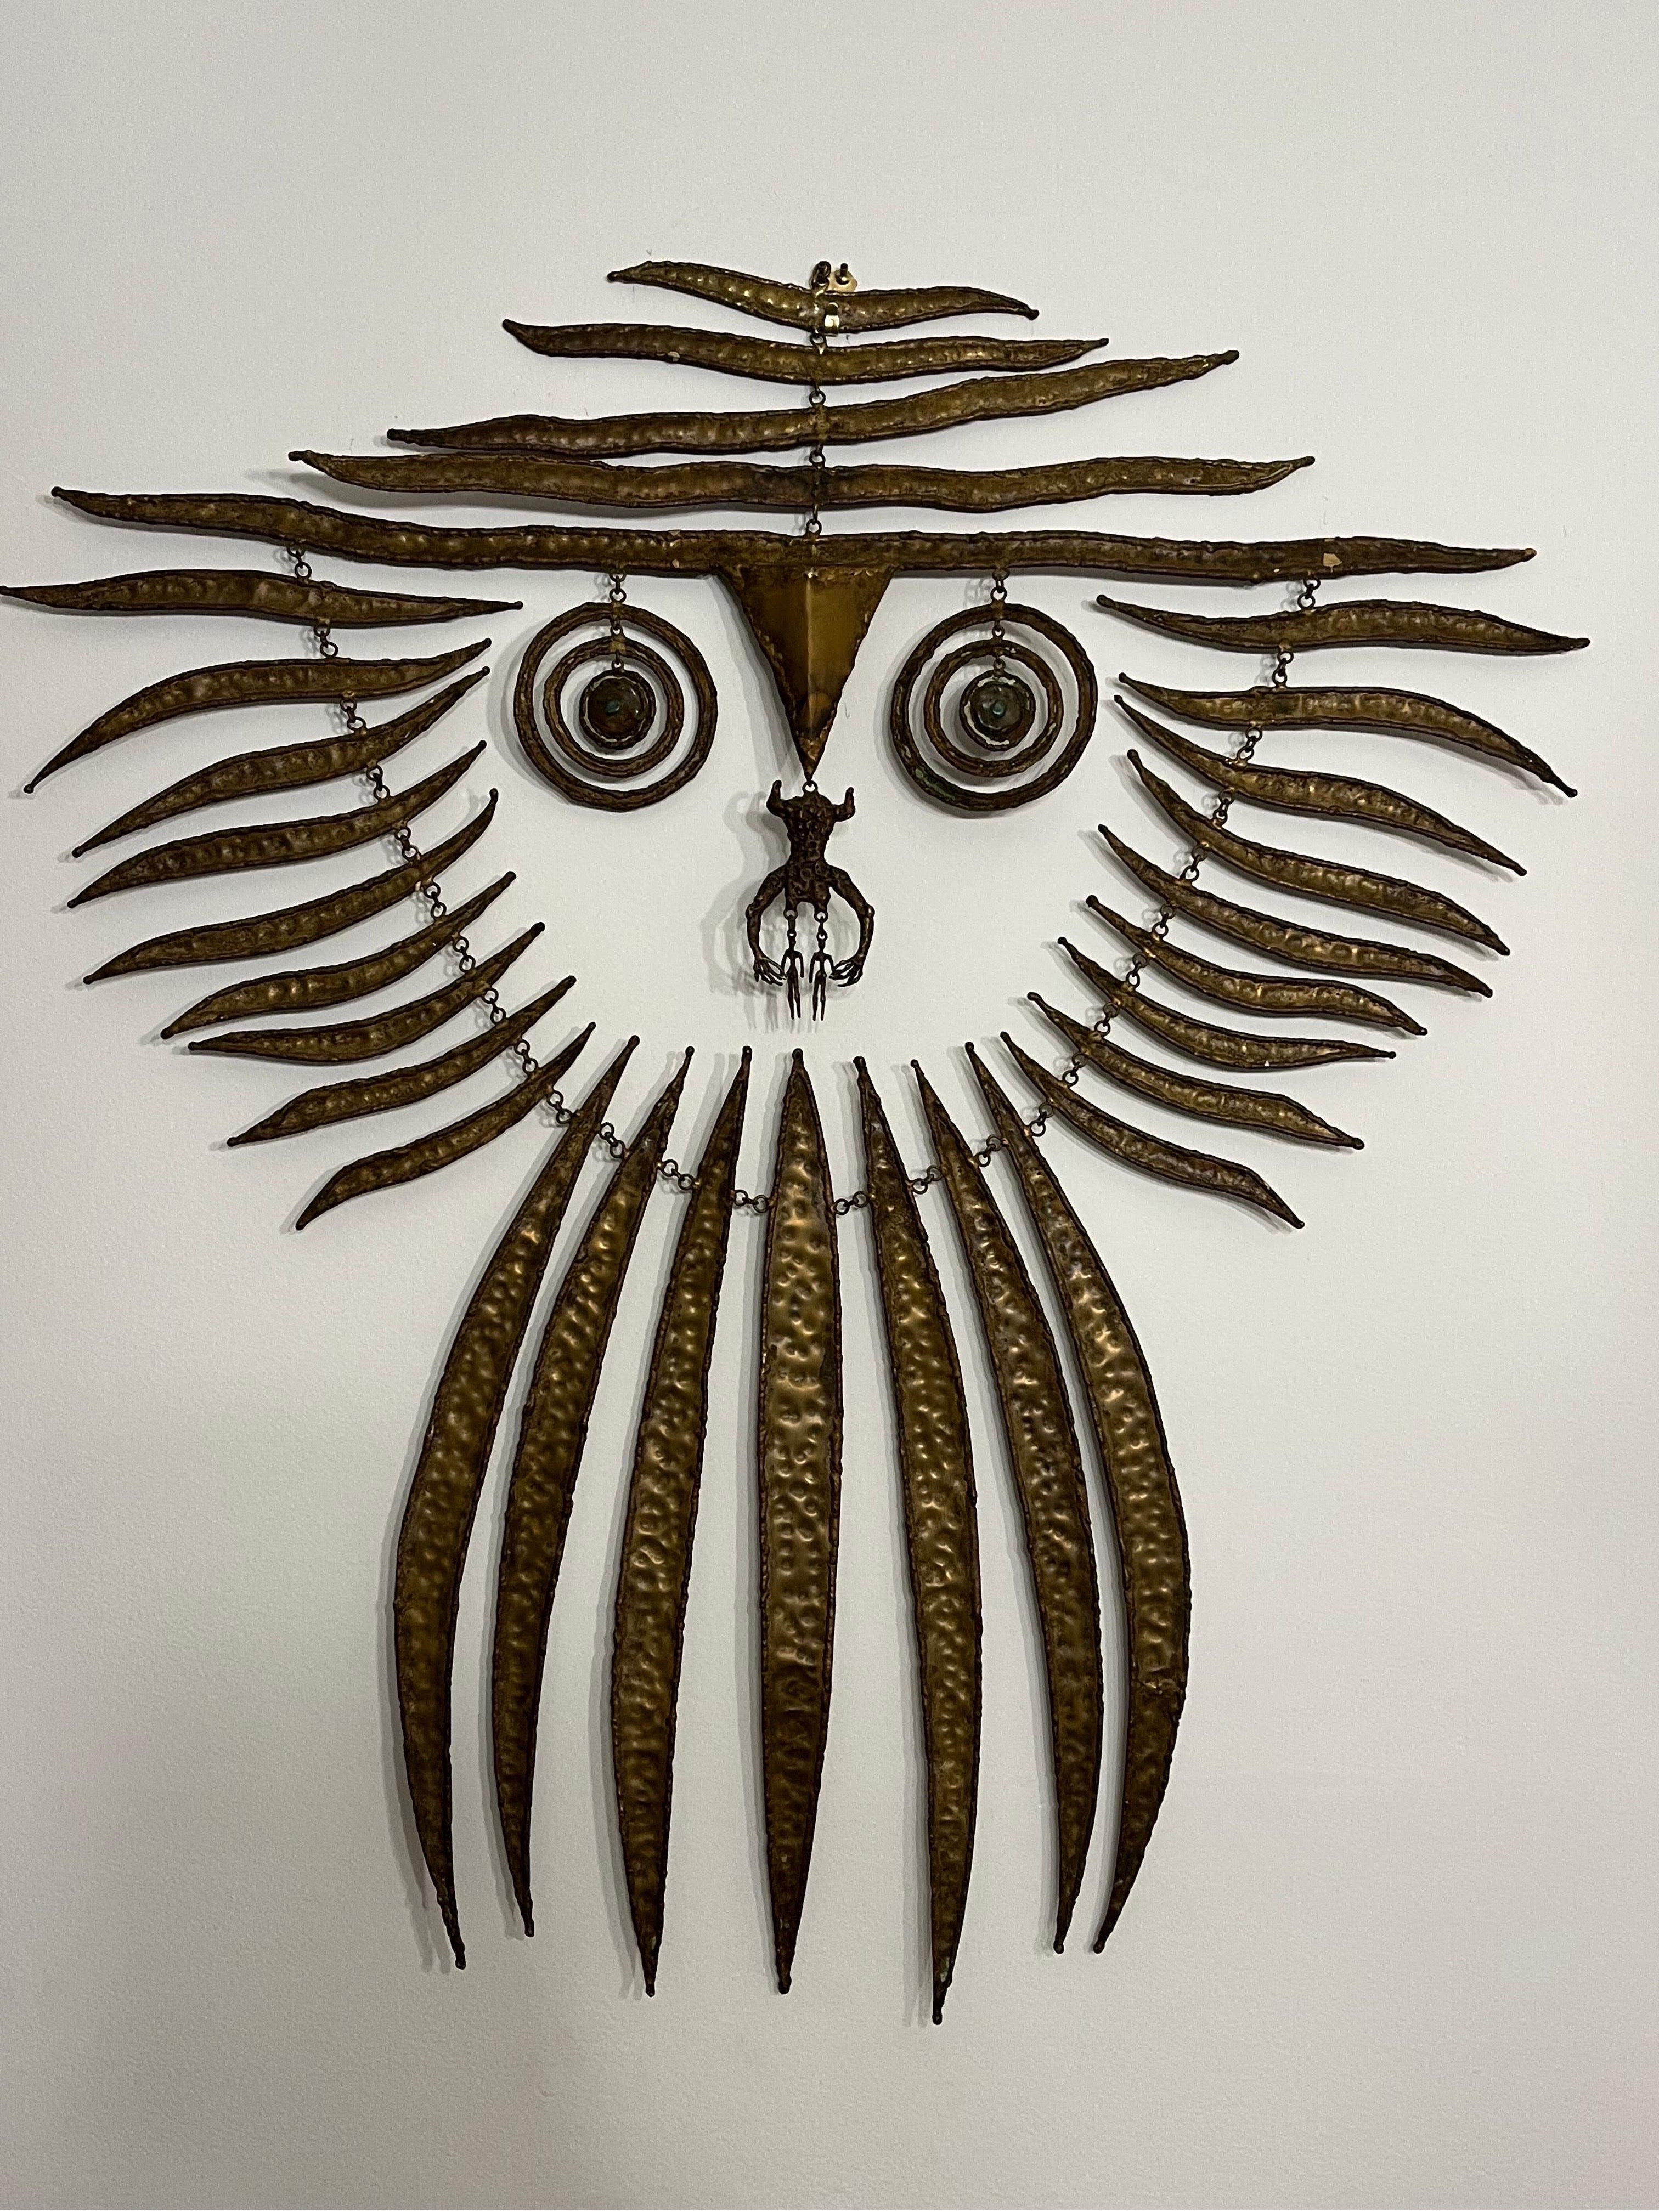 A mid century era, circa 1960’s, sculpted bronze kinetic hanging sculpture by Hungarian artist Pal Kepenyes (1926 - 2021). The abstracted figure has a surround like an elongated mane. The points radiating from the central face. The eyes are